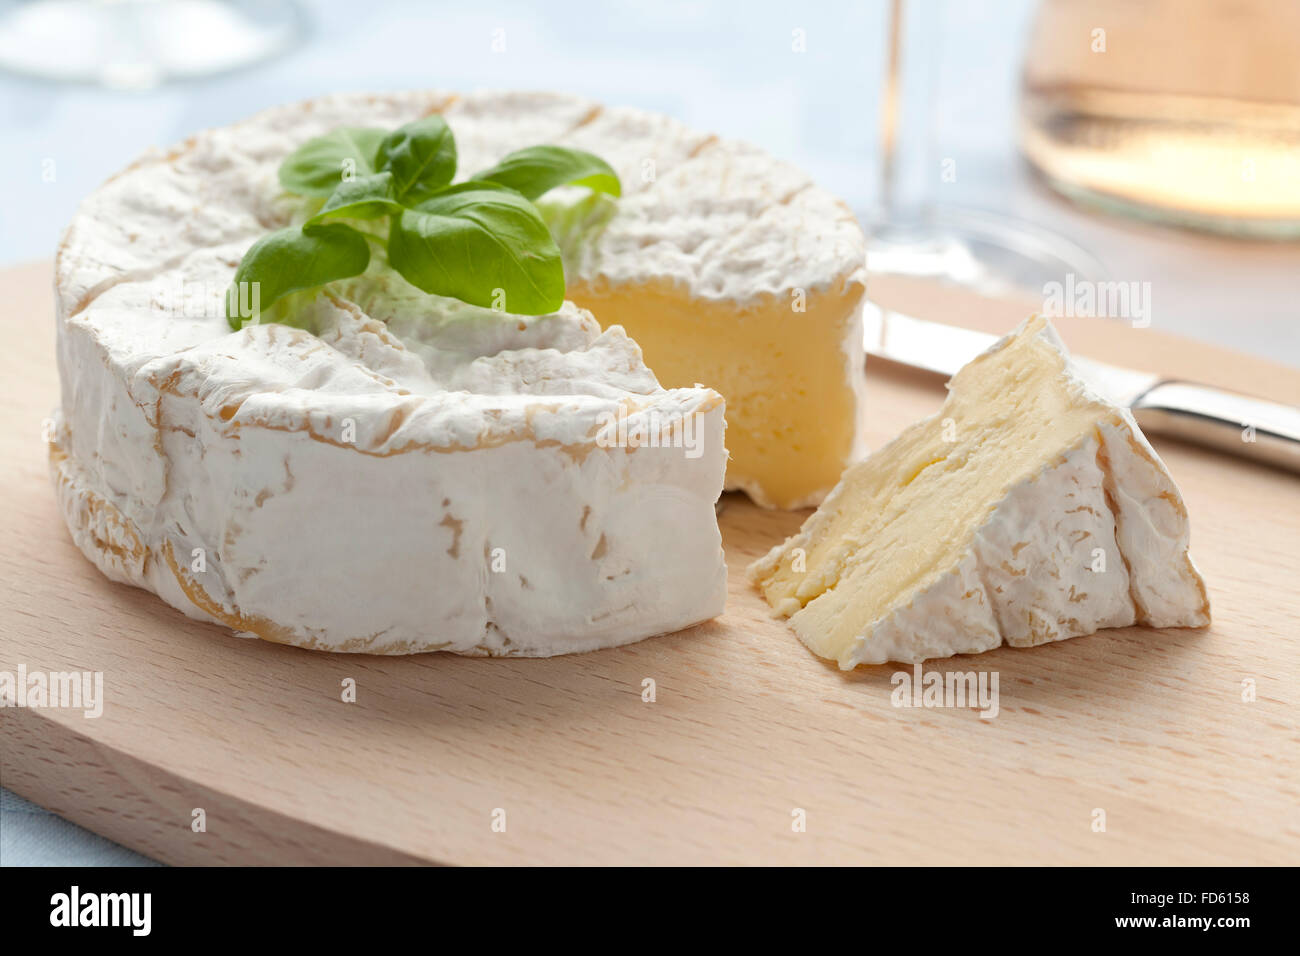 Fresh French Camembert cheese and a slice Stock Photo